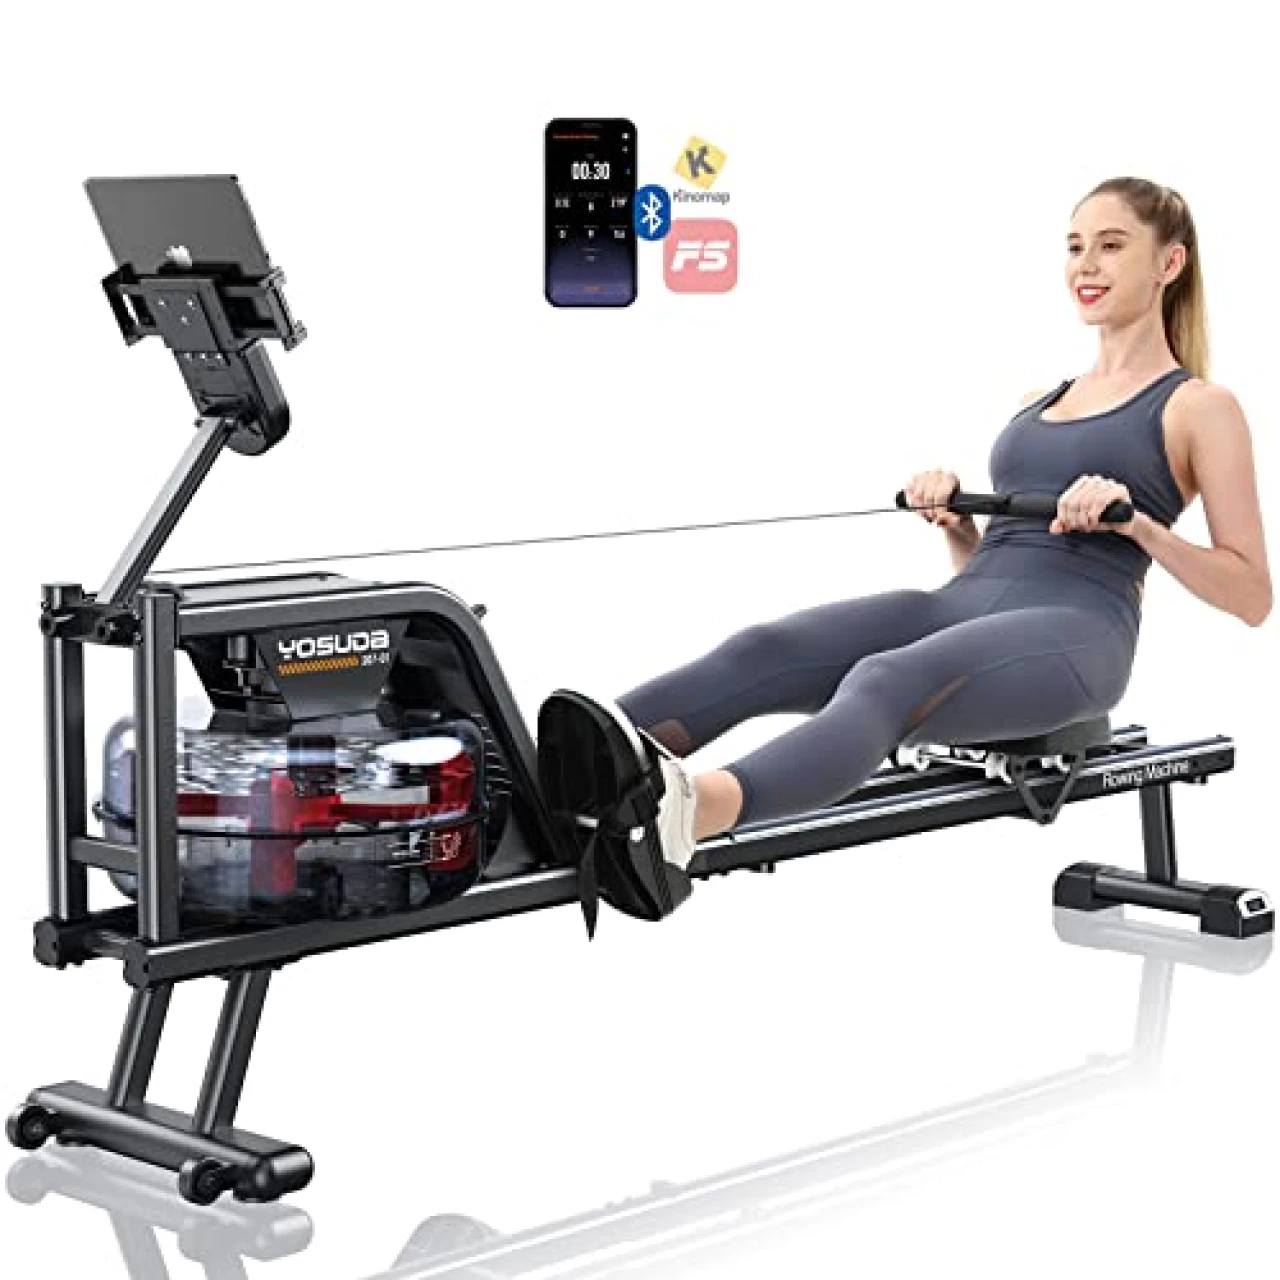 YOSUDA Water Rowing Machines with Bluetooth-Water Rowers 350LBS Weight Capacity for Home Use with Smooth Aluminum Dual Slide Rail &amp; Rowing-Dedicated Monitor